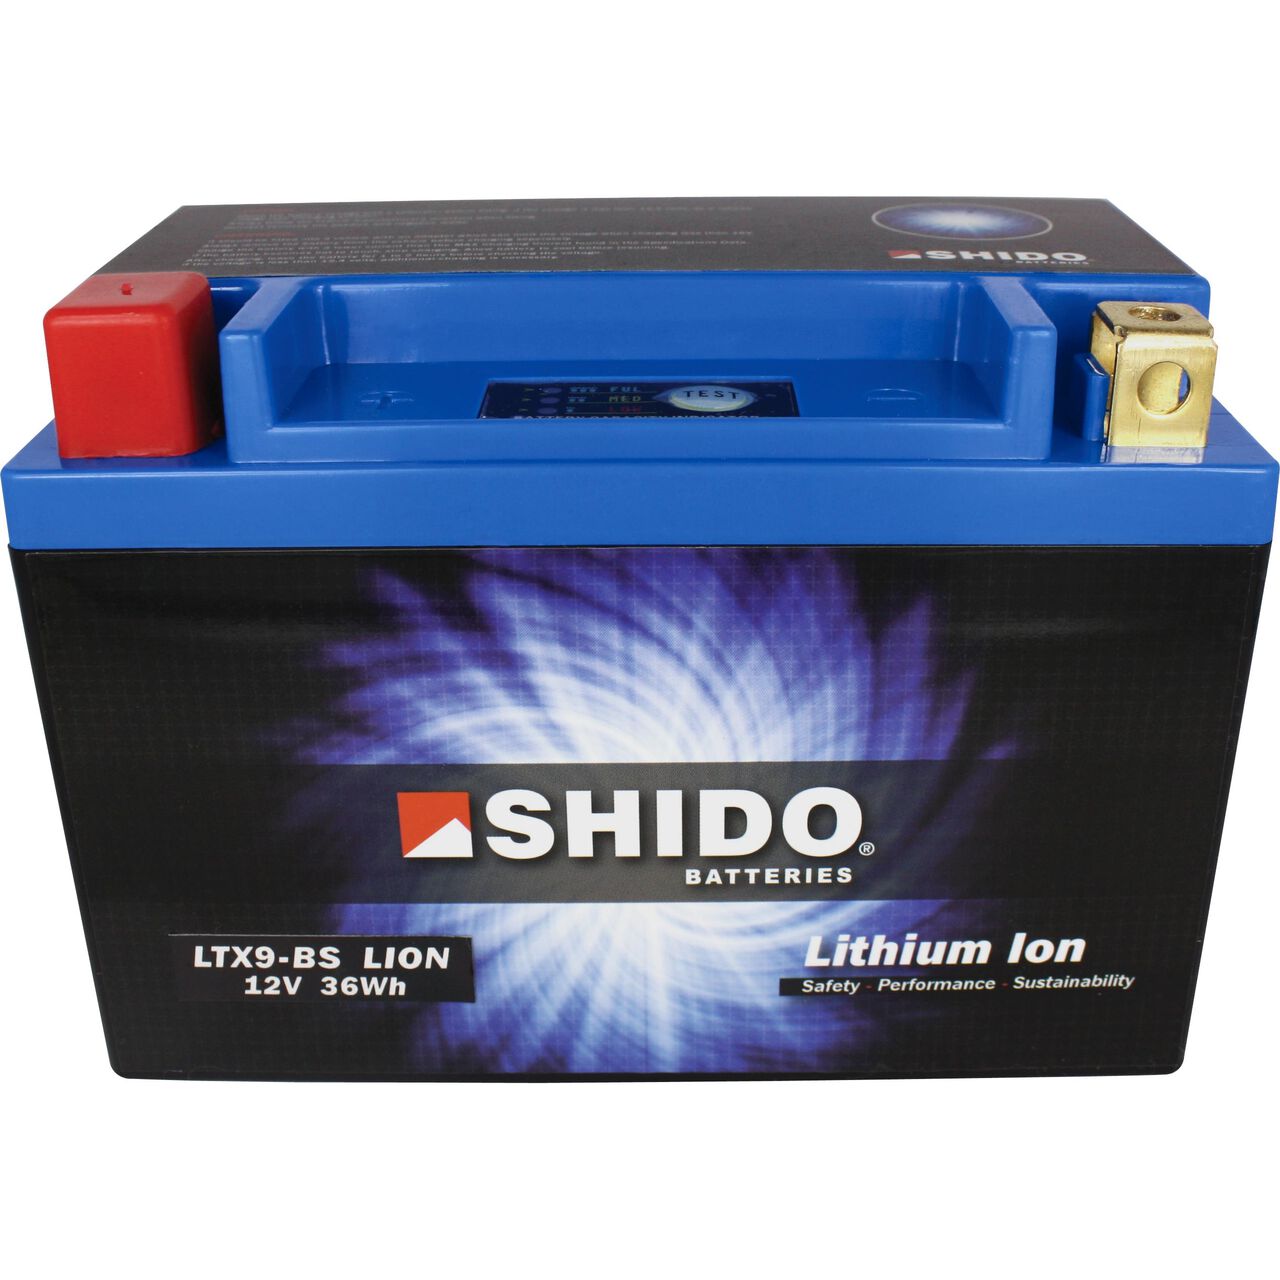 SHIDO-Lithium Iron Phosphate Battery LTX9-BS For Motorcycle Motorbike--12V 36Wh